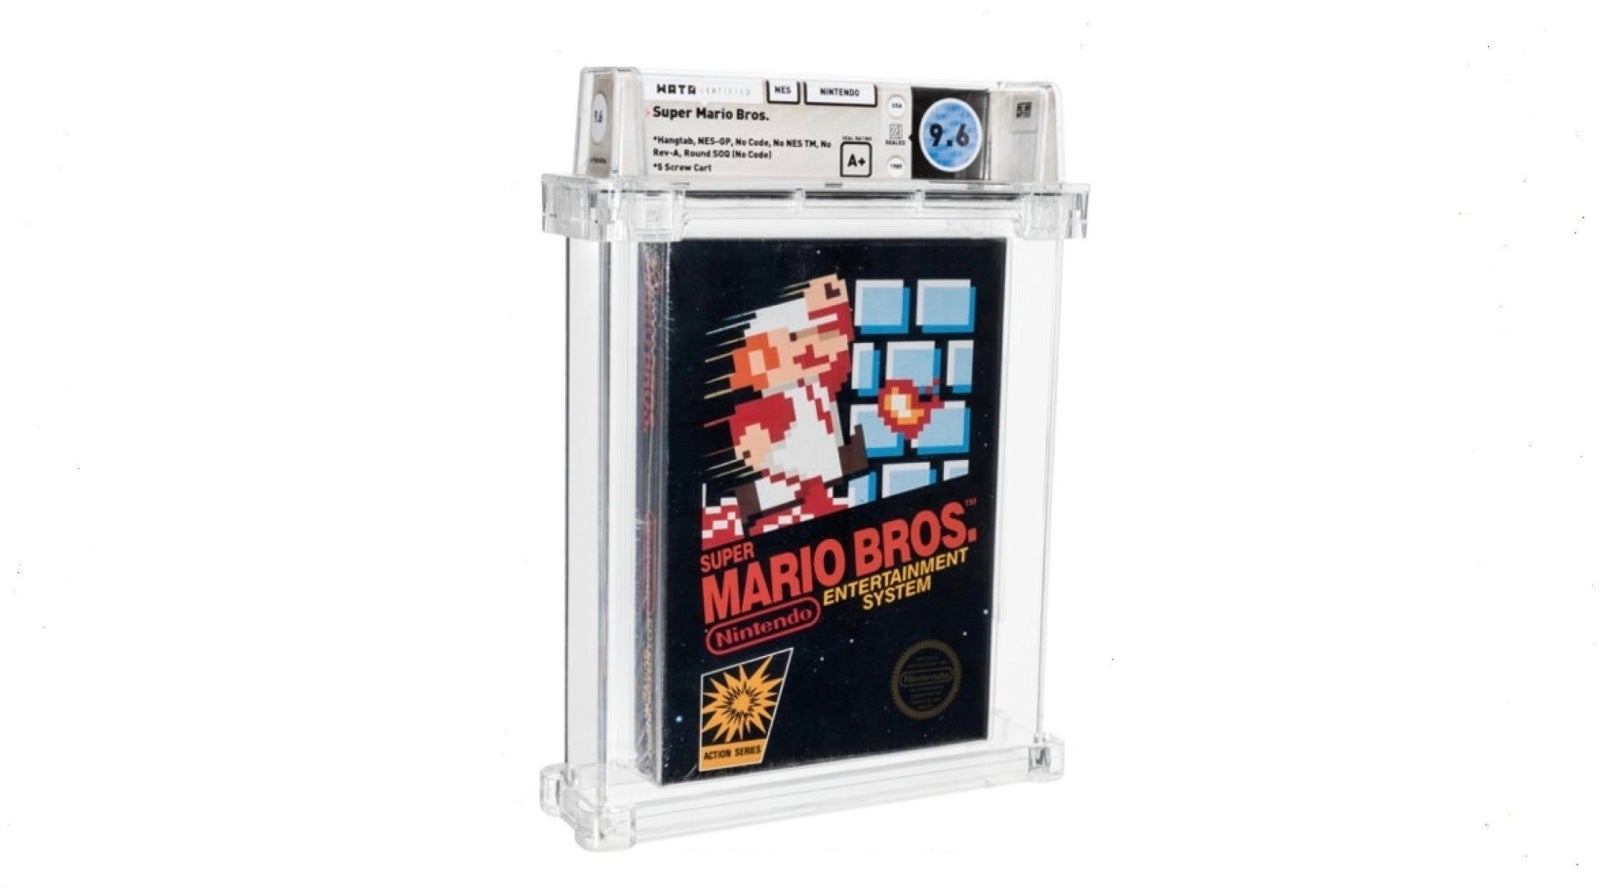 Image for Unopened Super Mario Bros. sells for $660,000, smashing world record